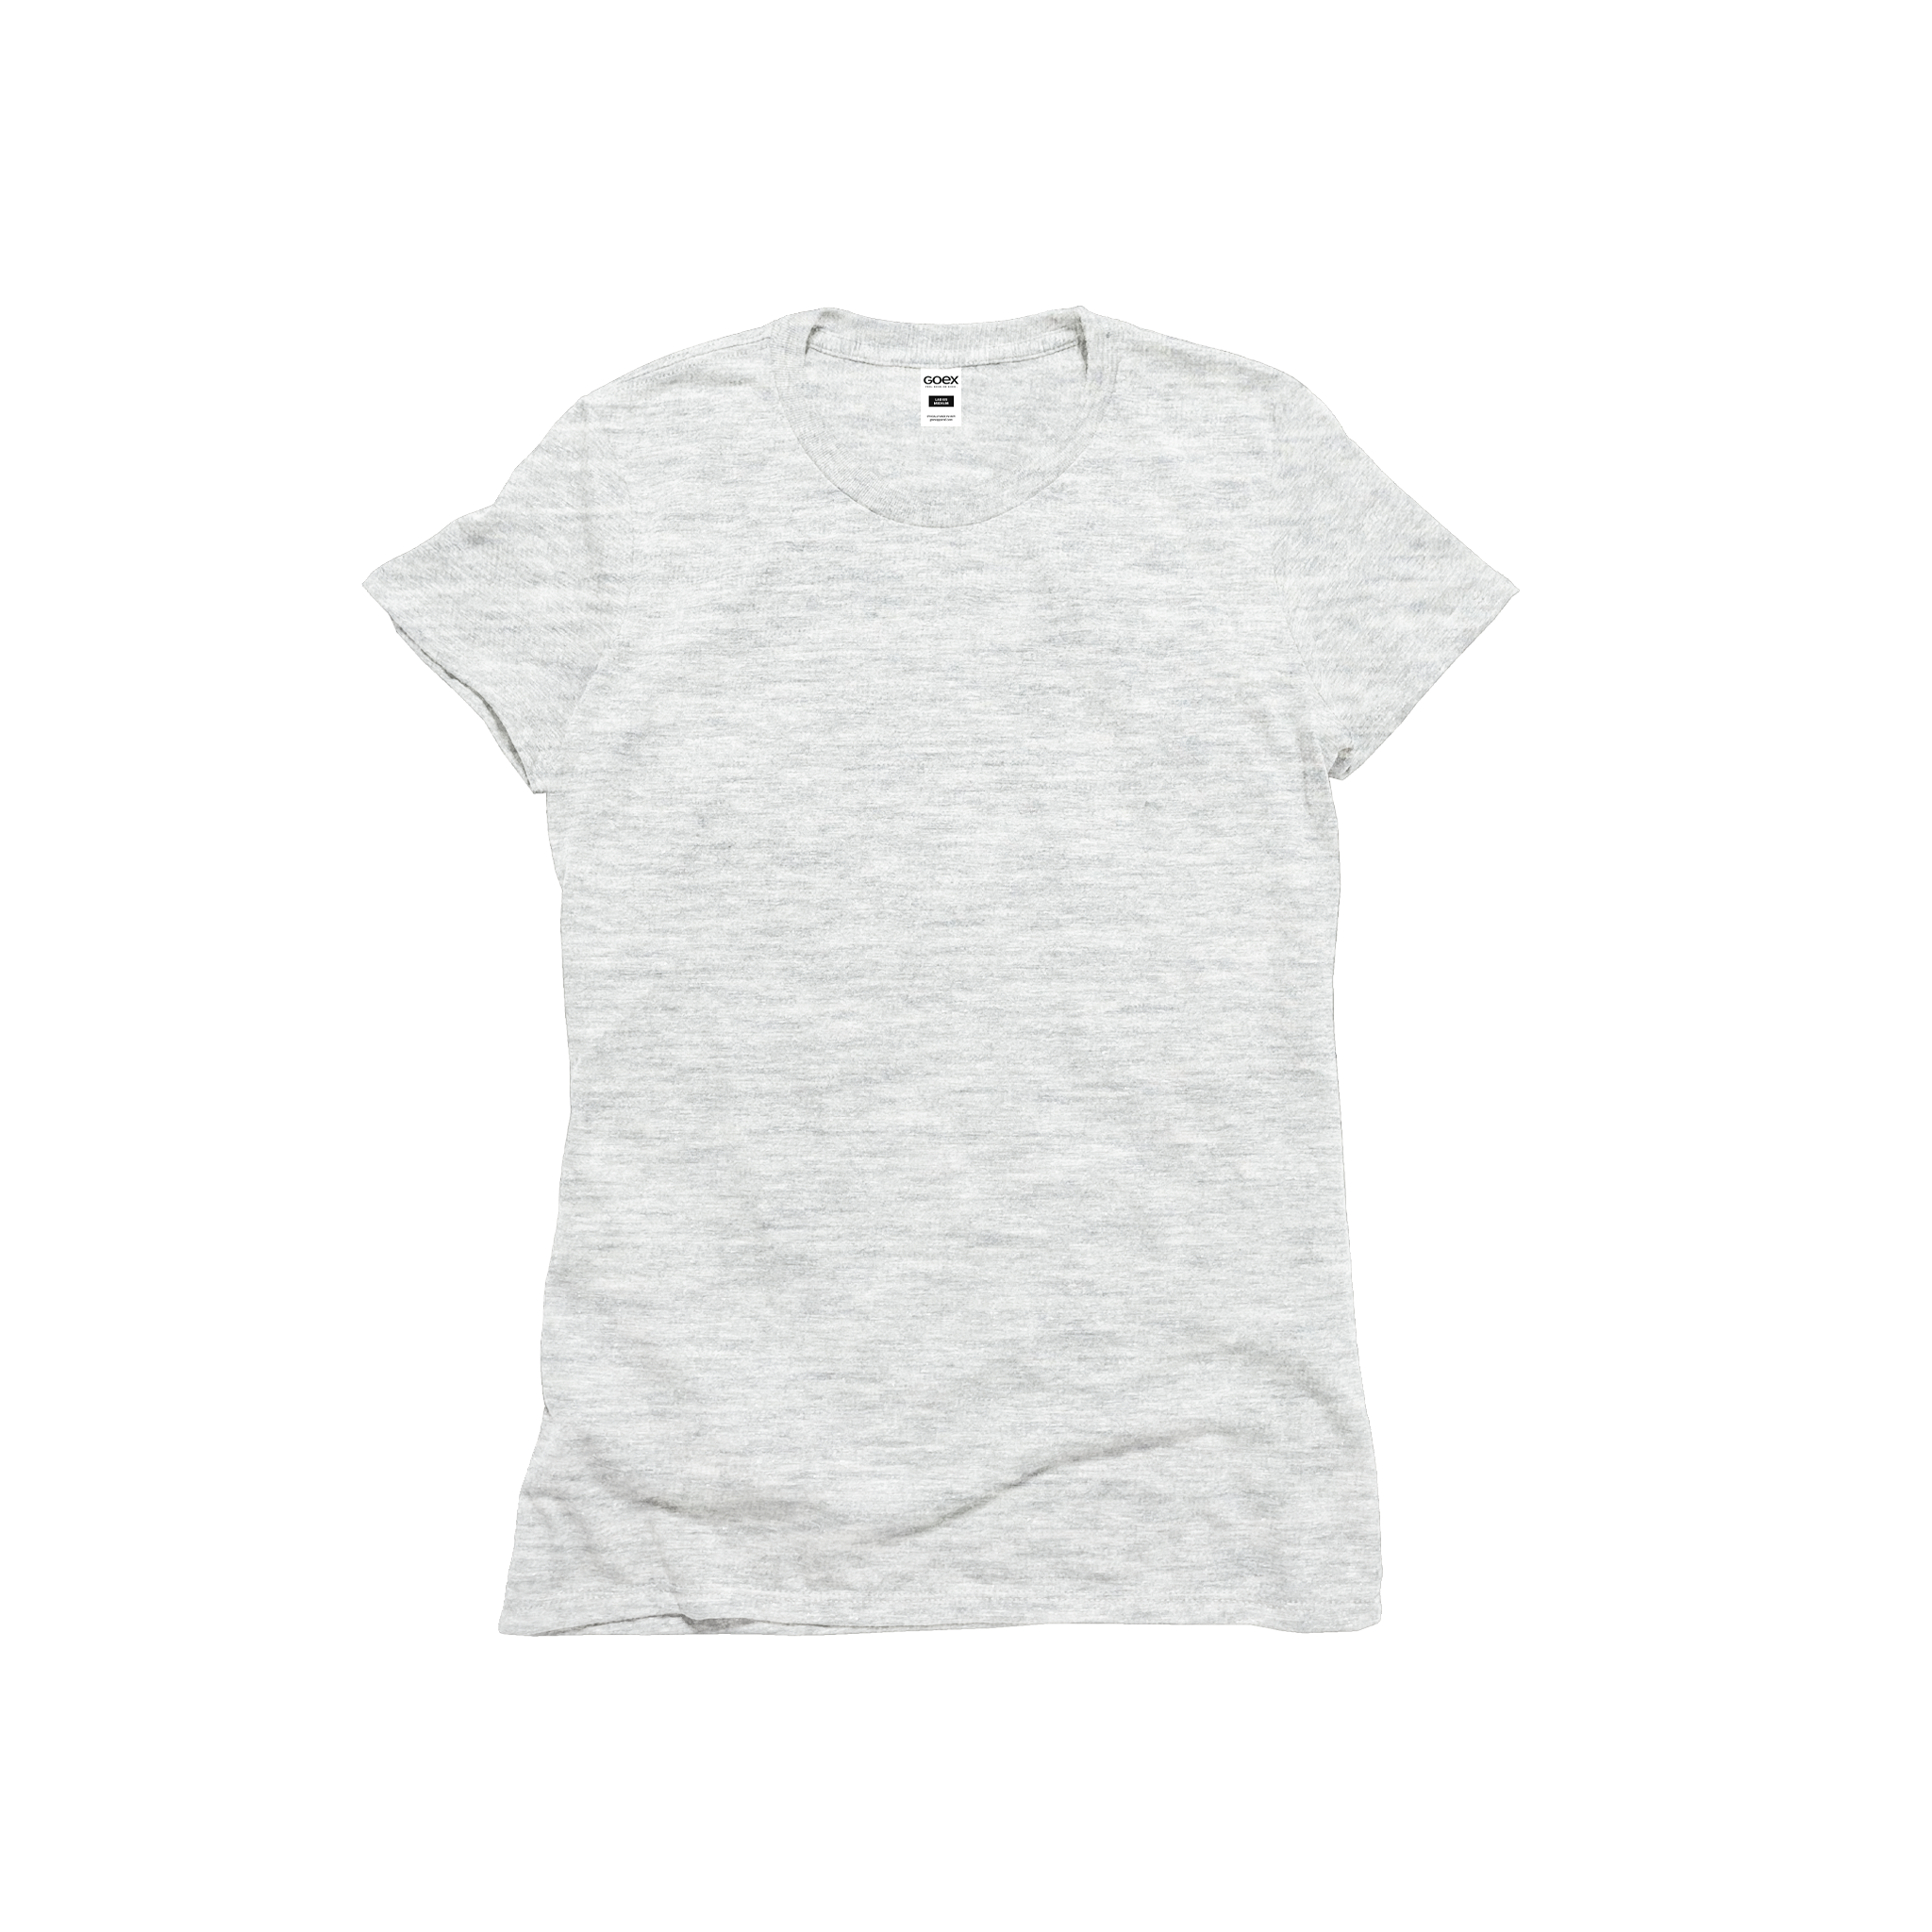 Front Flat Lay of GOEX Ladies Eco Triblend Tee in Vintage White